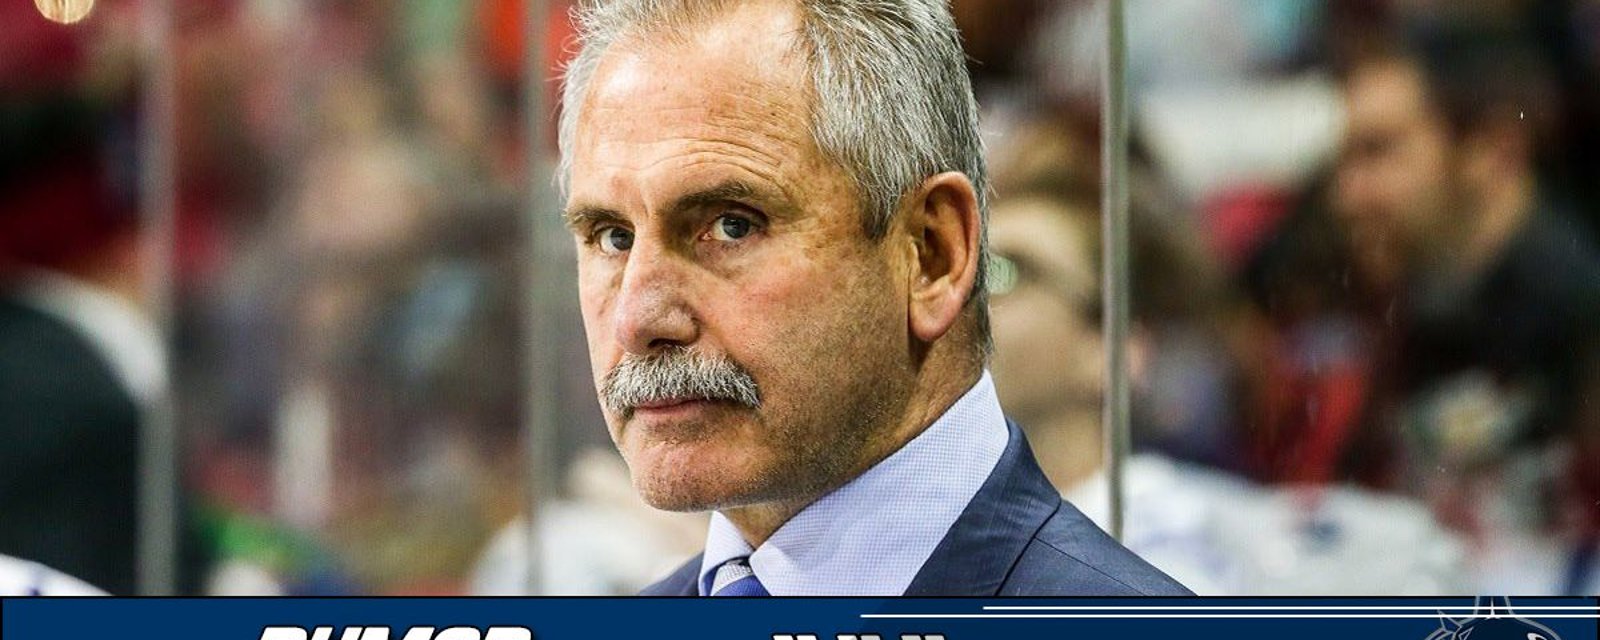 Rumor: Rival teams may have interest in Vancouver's head coach.